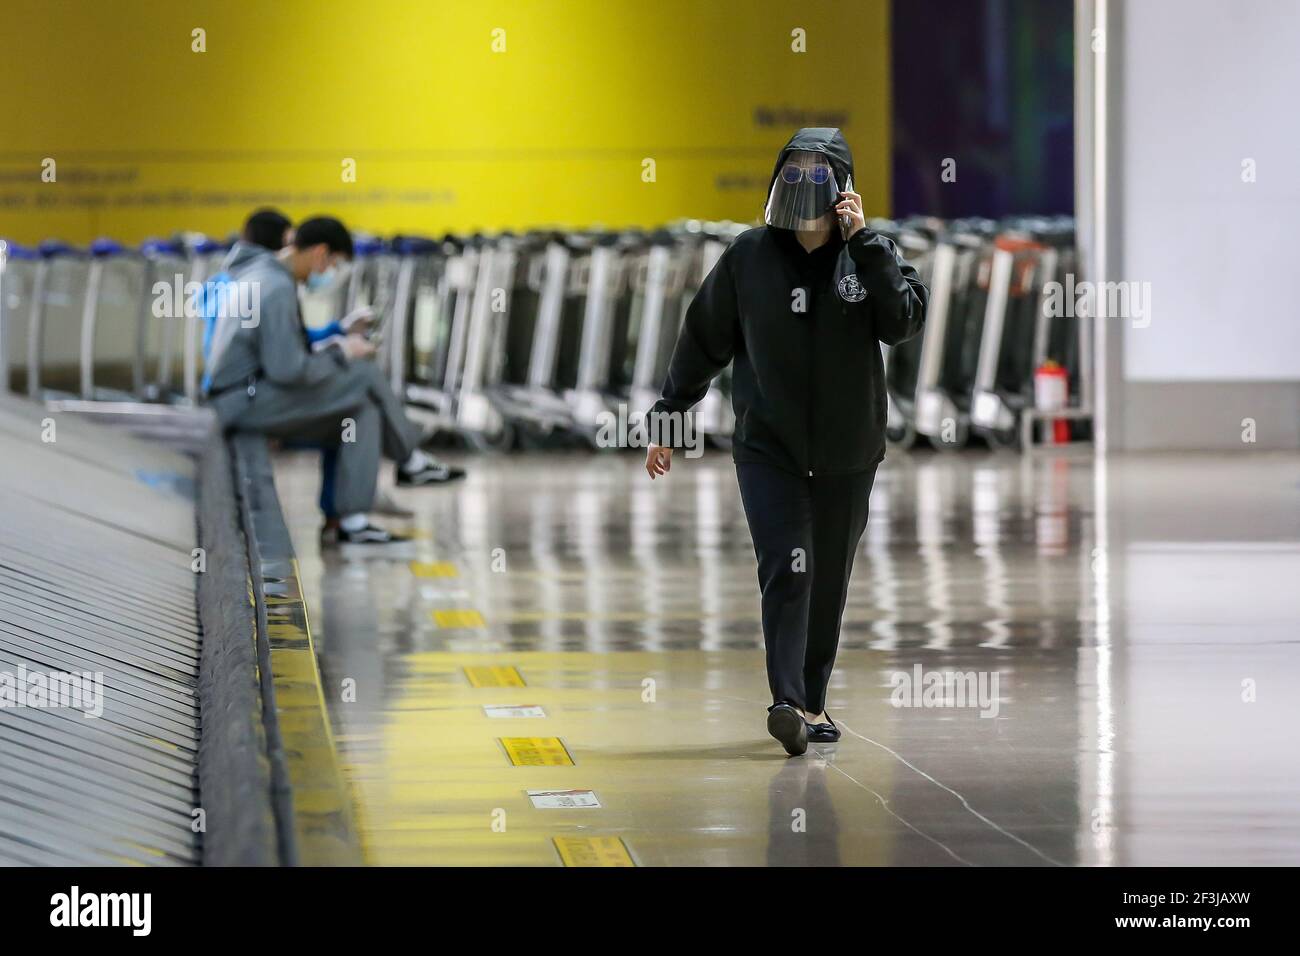 (210317) -- MANILA, March 17, 2021 (Xinhua) -- An airport employee wearing protective shield walks inside the Terminal 1 of the Ninoy Aquino International Airport in Manila, the Philippines on March 17, 2021. The Philippines said it will temporarily suspend the entry of foreigners and some citizens as the Southeast Asian country battles a renewed spike in COVID-19 cases. In a statement issued on Tuesday night, the country's coronavirus task force said foreign citizens and returning nationals who had not been working overseas will not be able to enter the country from March 20 until April 19 u Stock Photo